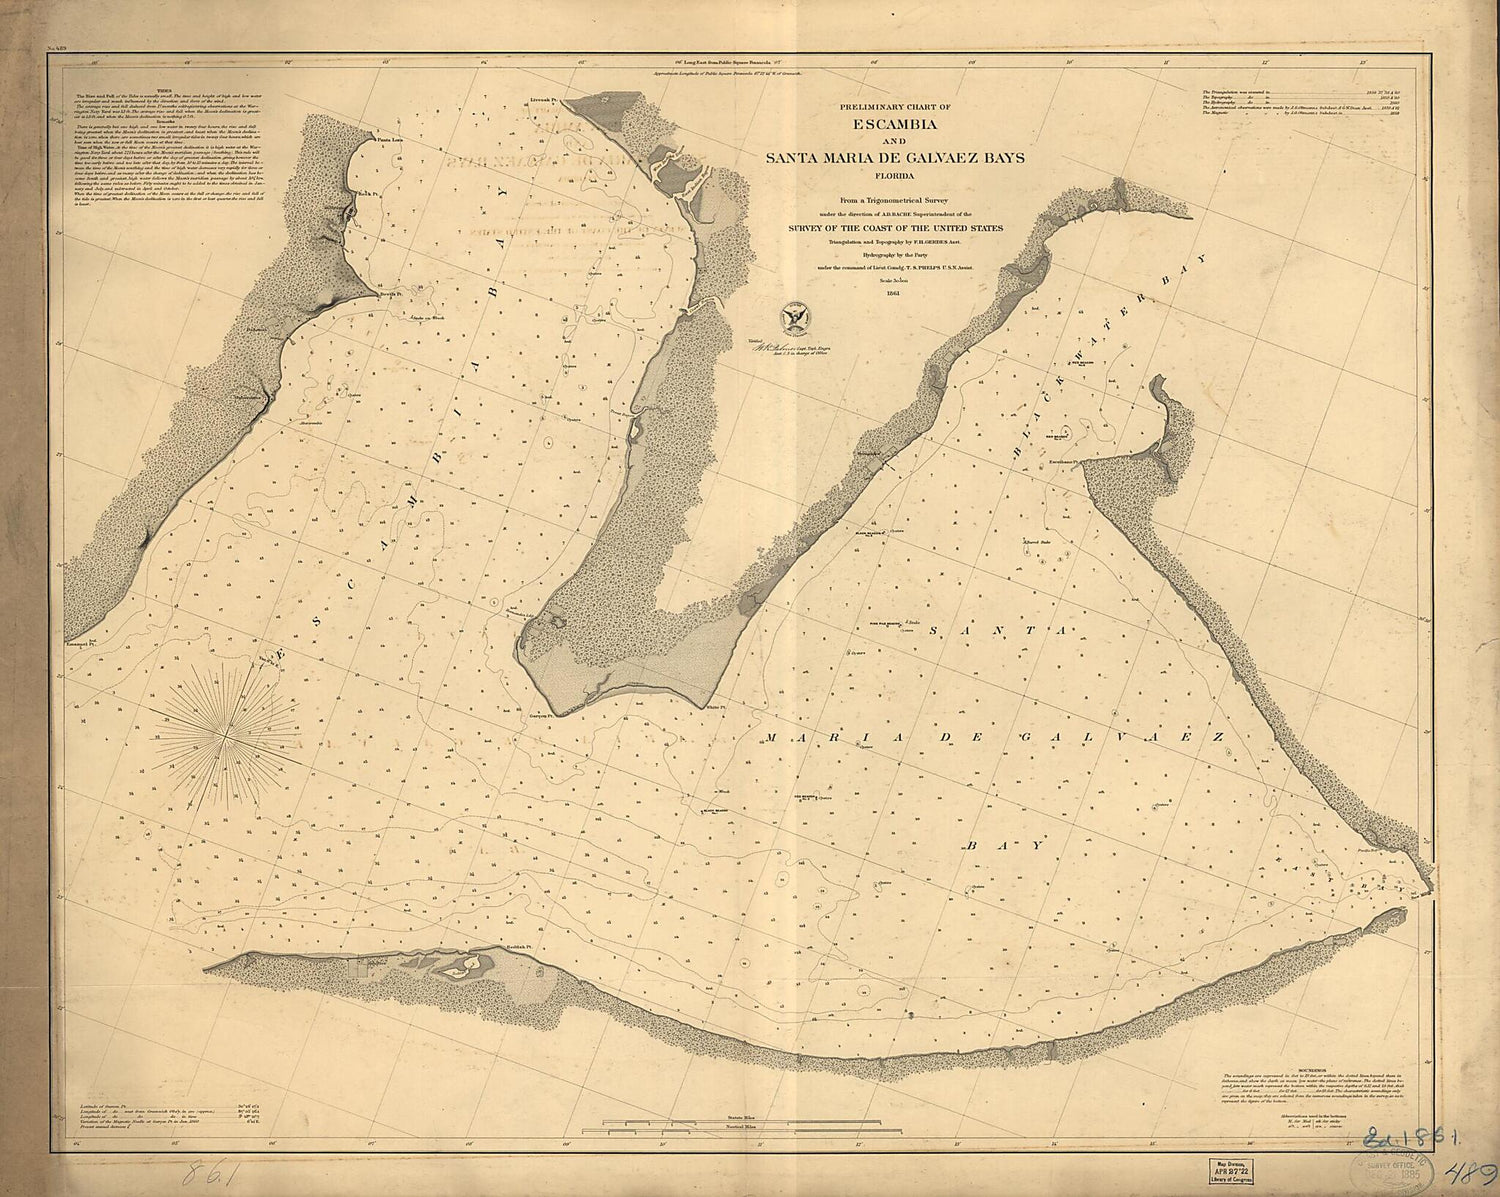 This old map of Preliminary Chart of Escambia and Santa Maria De Galvaez i.e., East Bays, Florida from 1861 was created by  United States Coast Survey in 1861